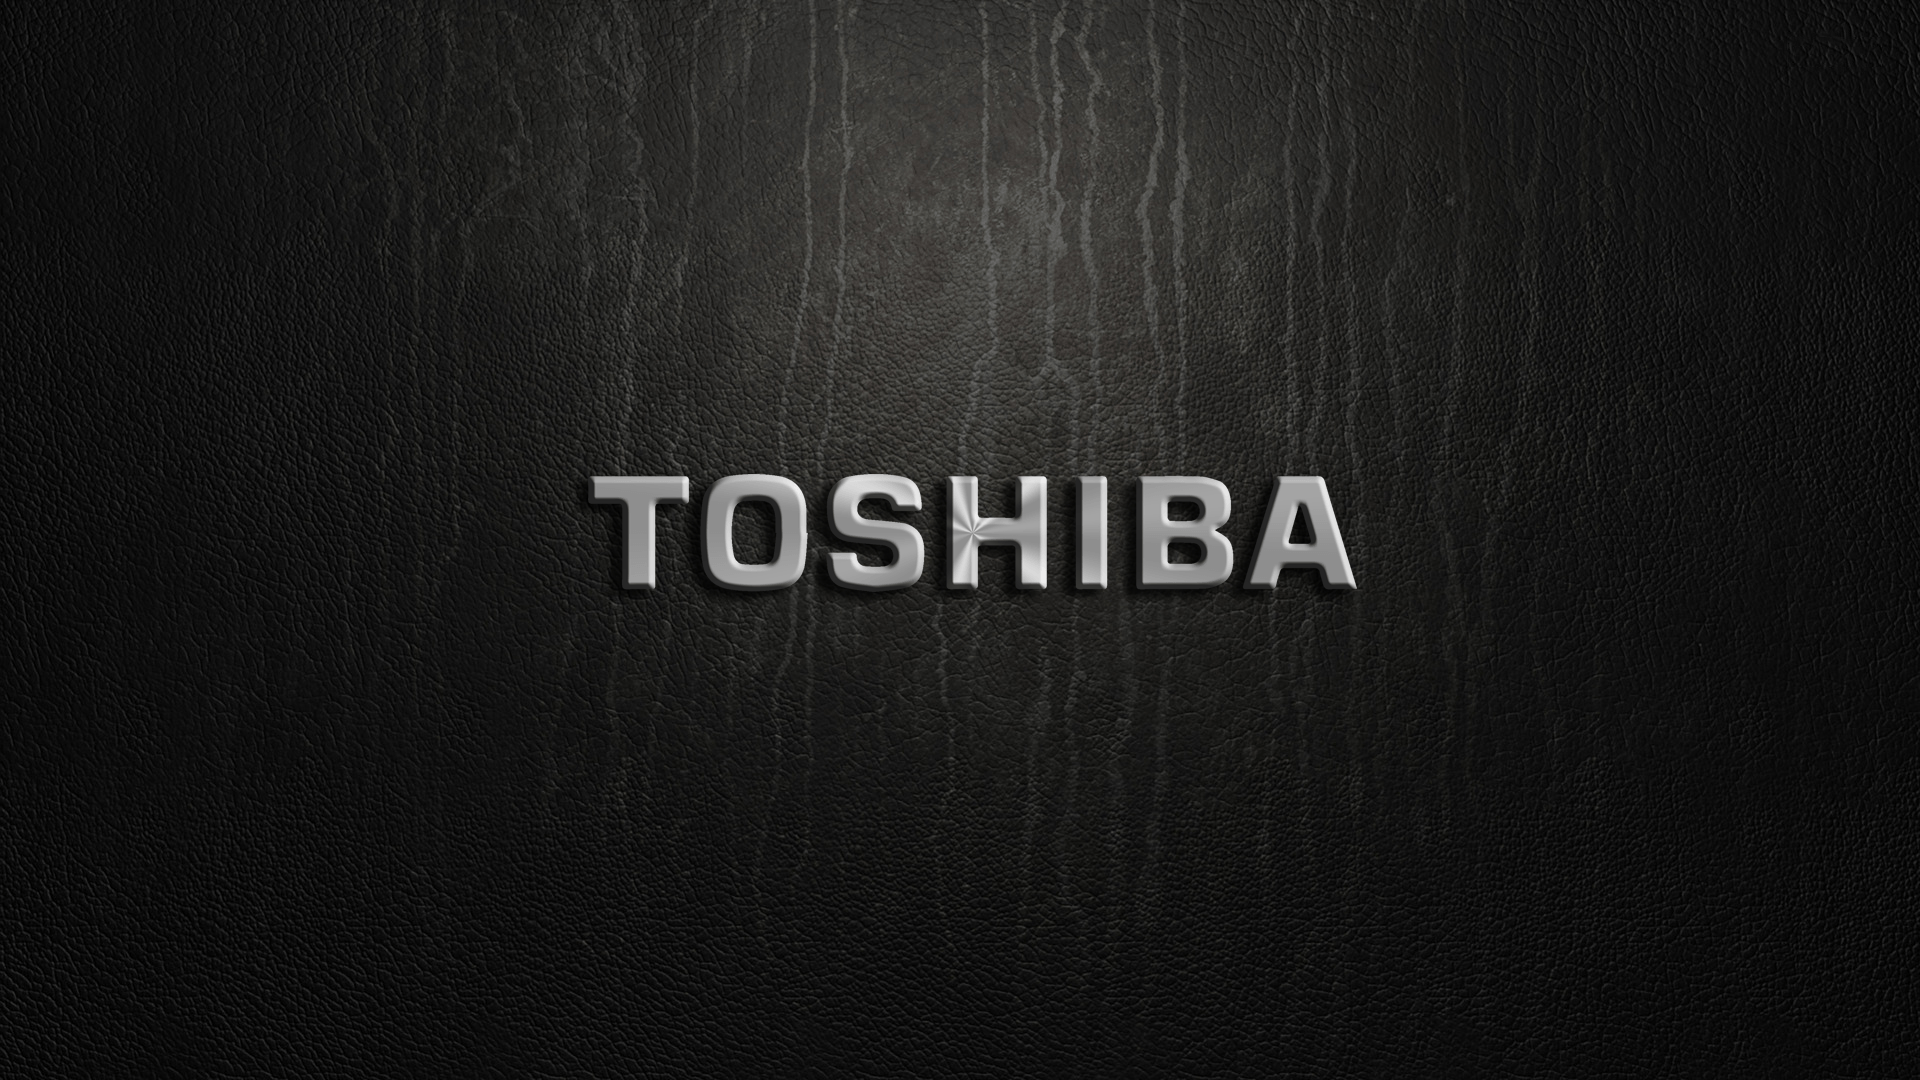 Toshiba Full HD Wallpaper and Background Imagex1080